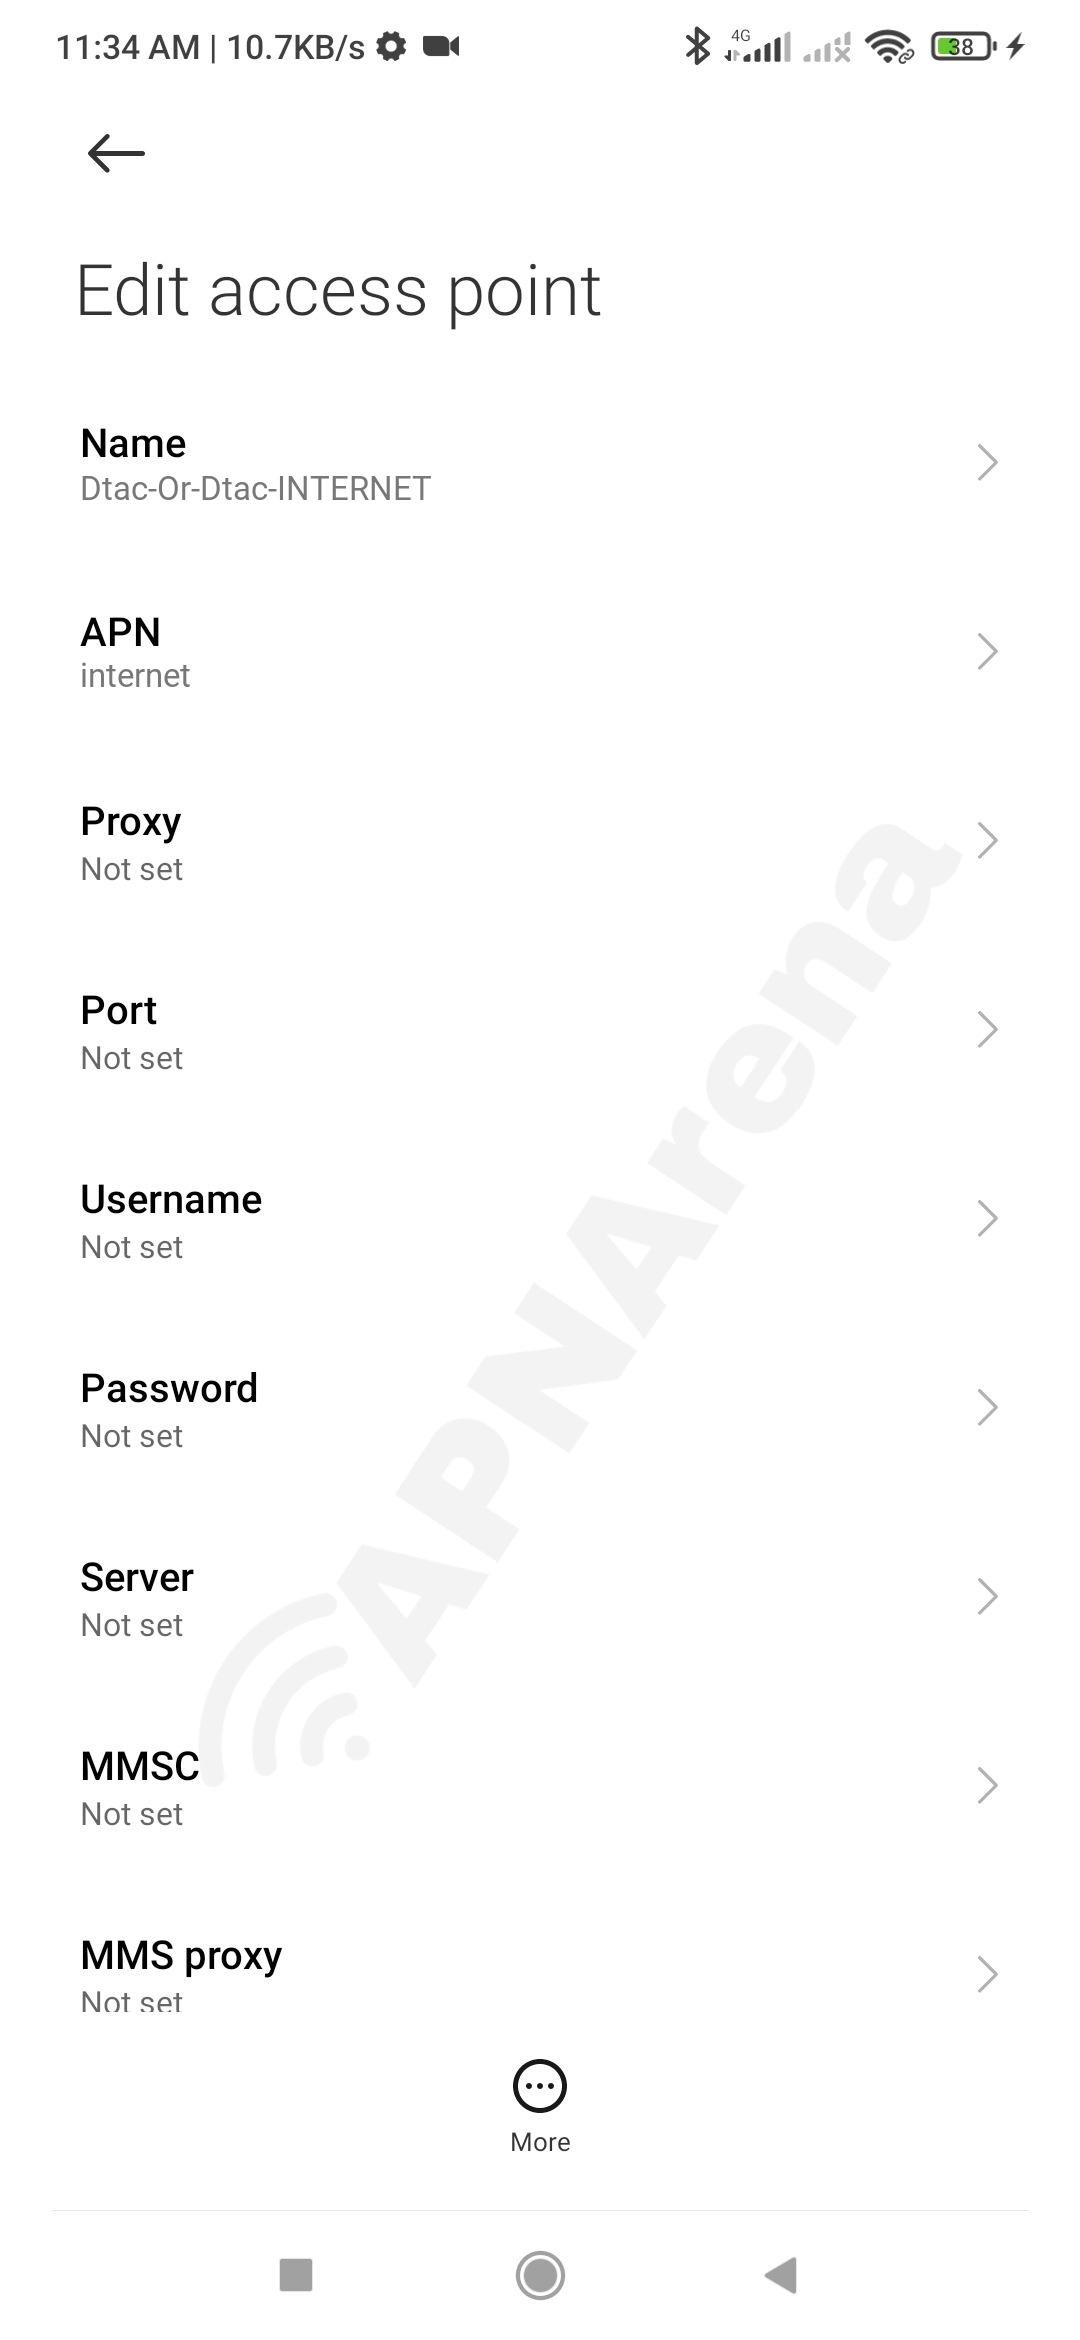 Dtac or dtac APN Settings for Android